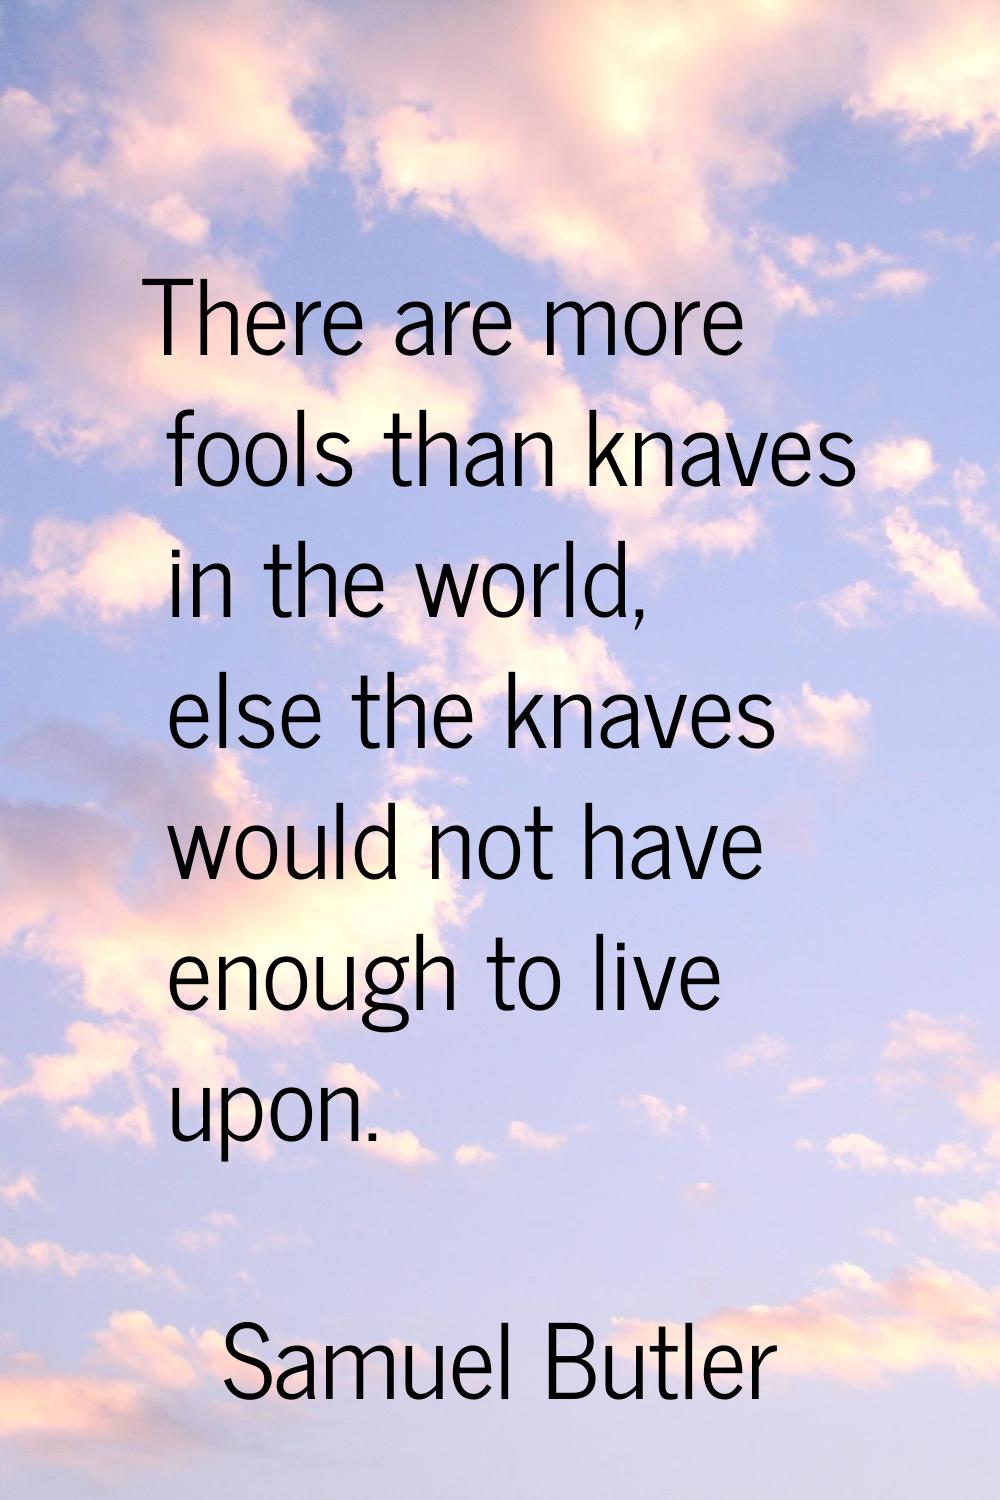 There are more fools than knaves in the world, else the knaves would not have enough to live upon.